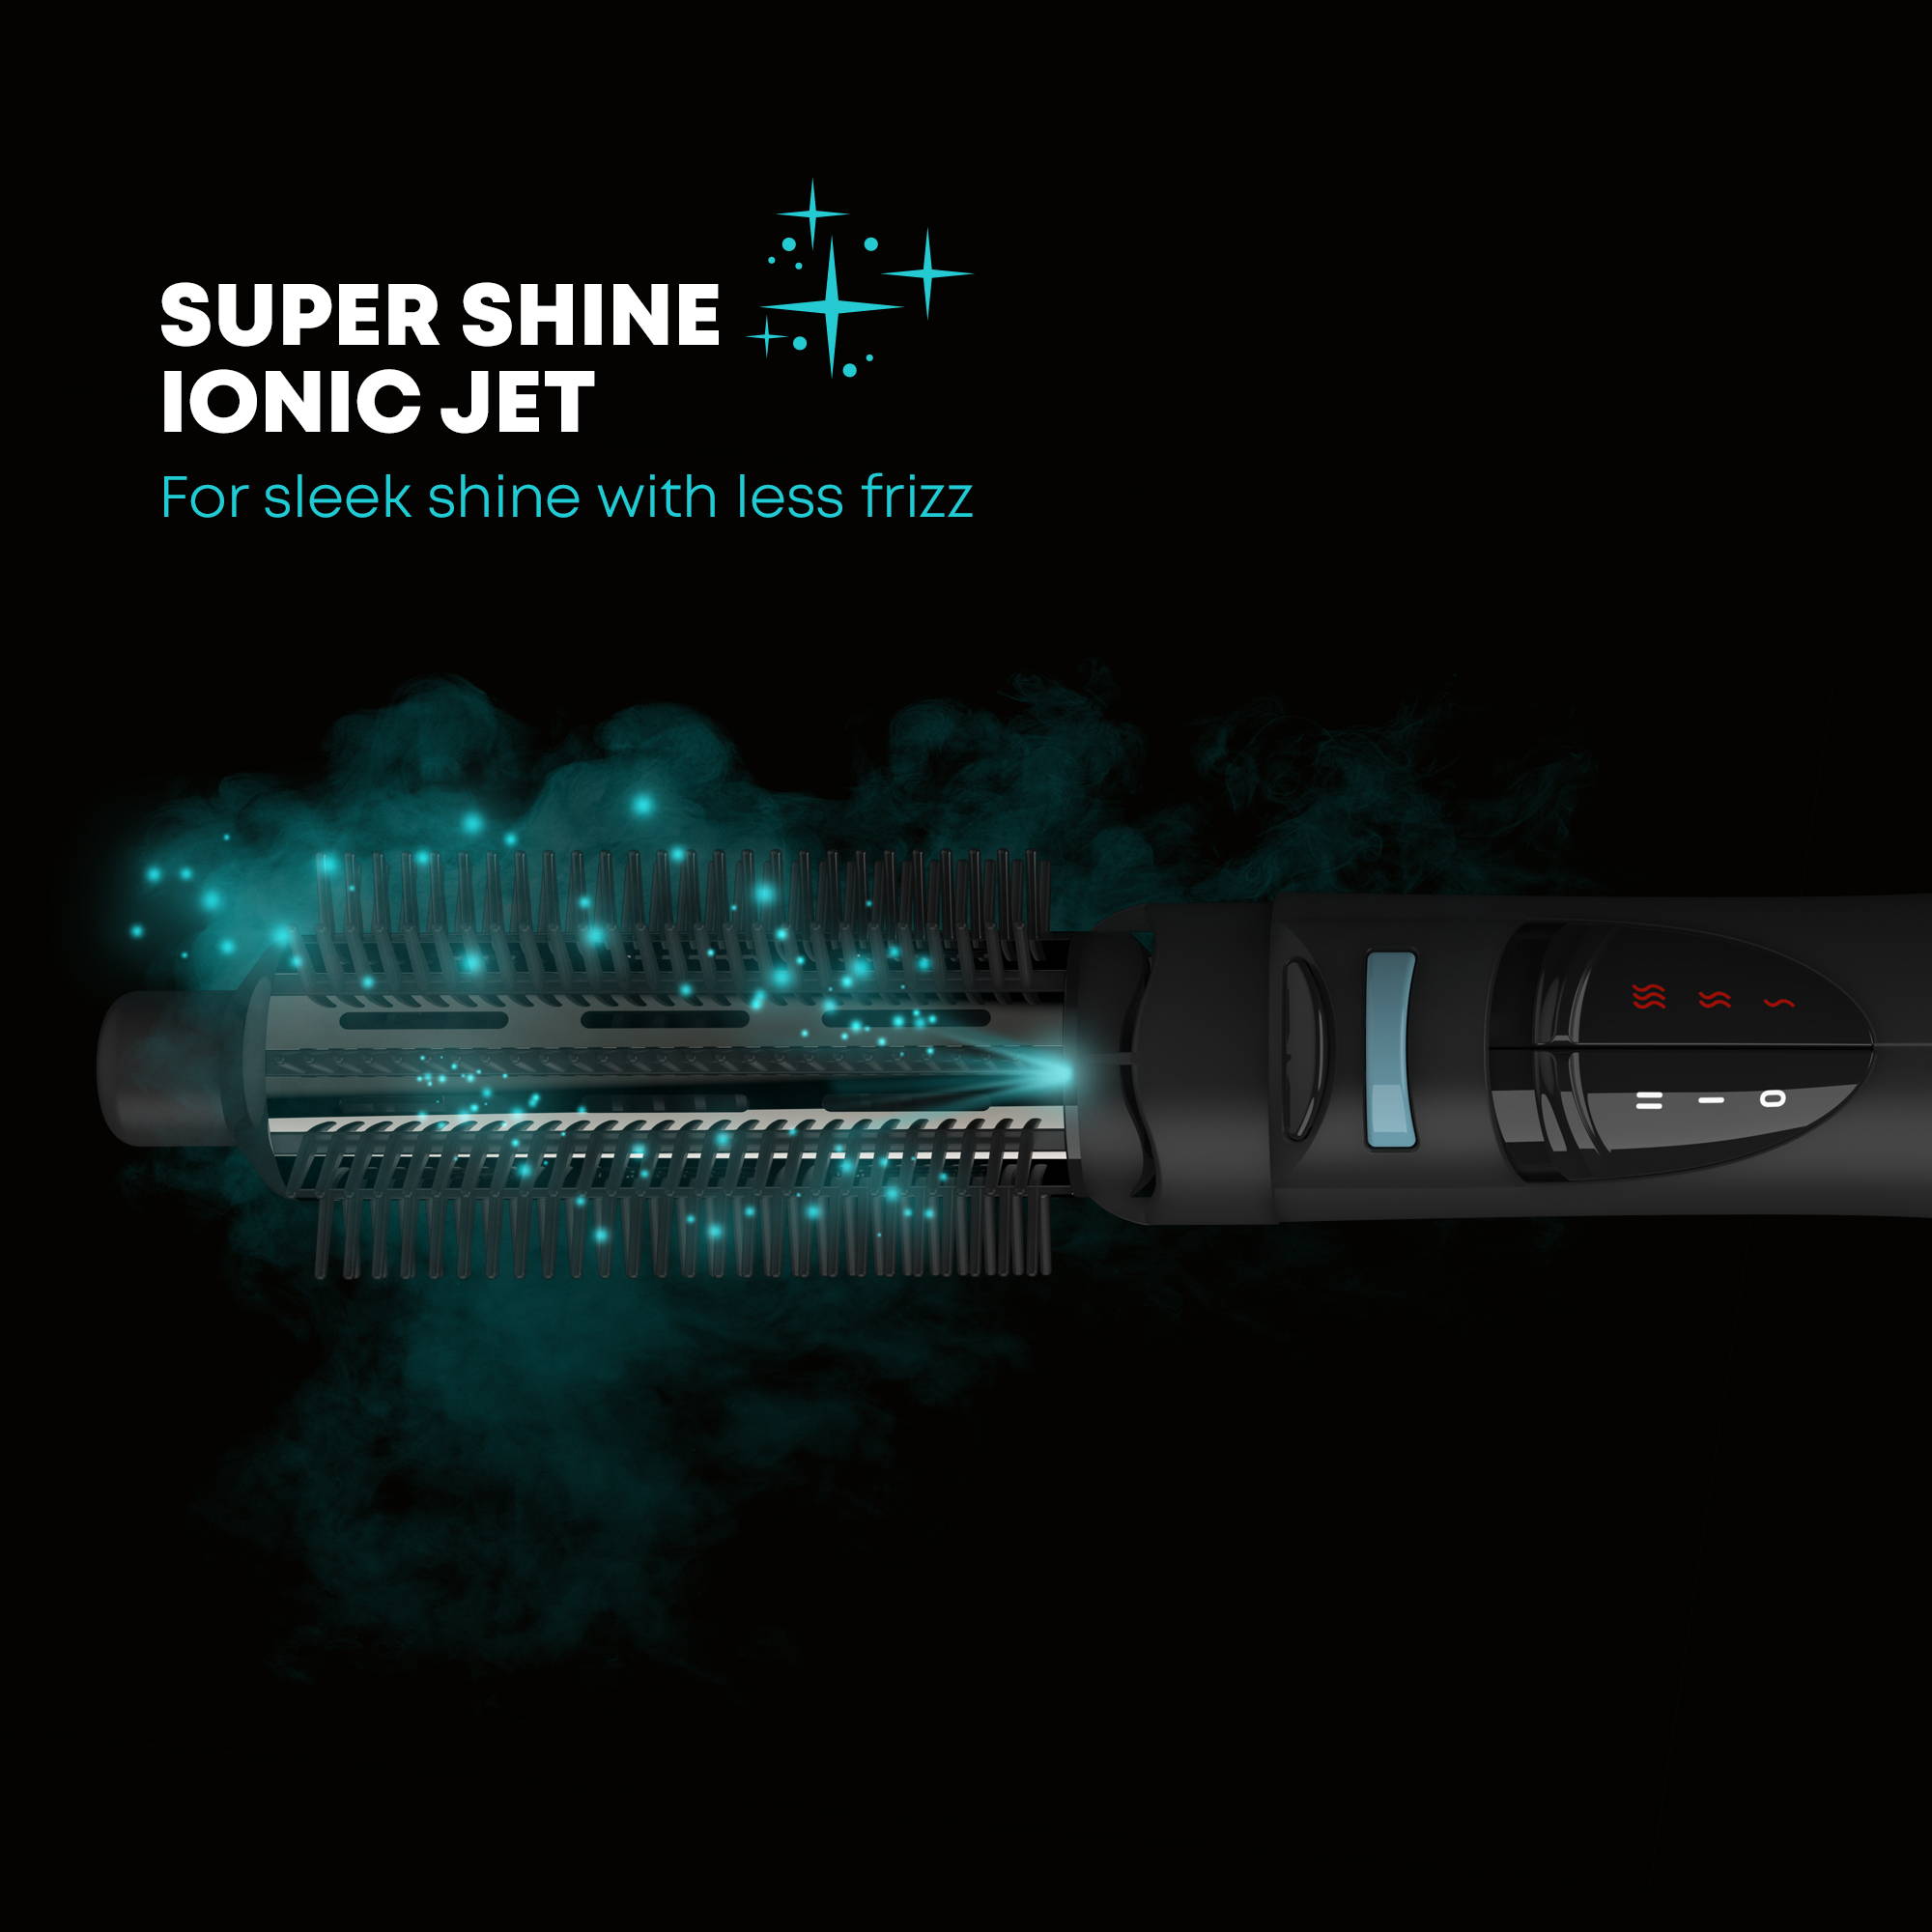 Super Shine Ionic Jet for reduced frizz